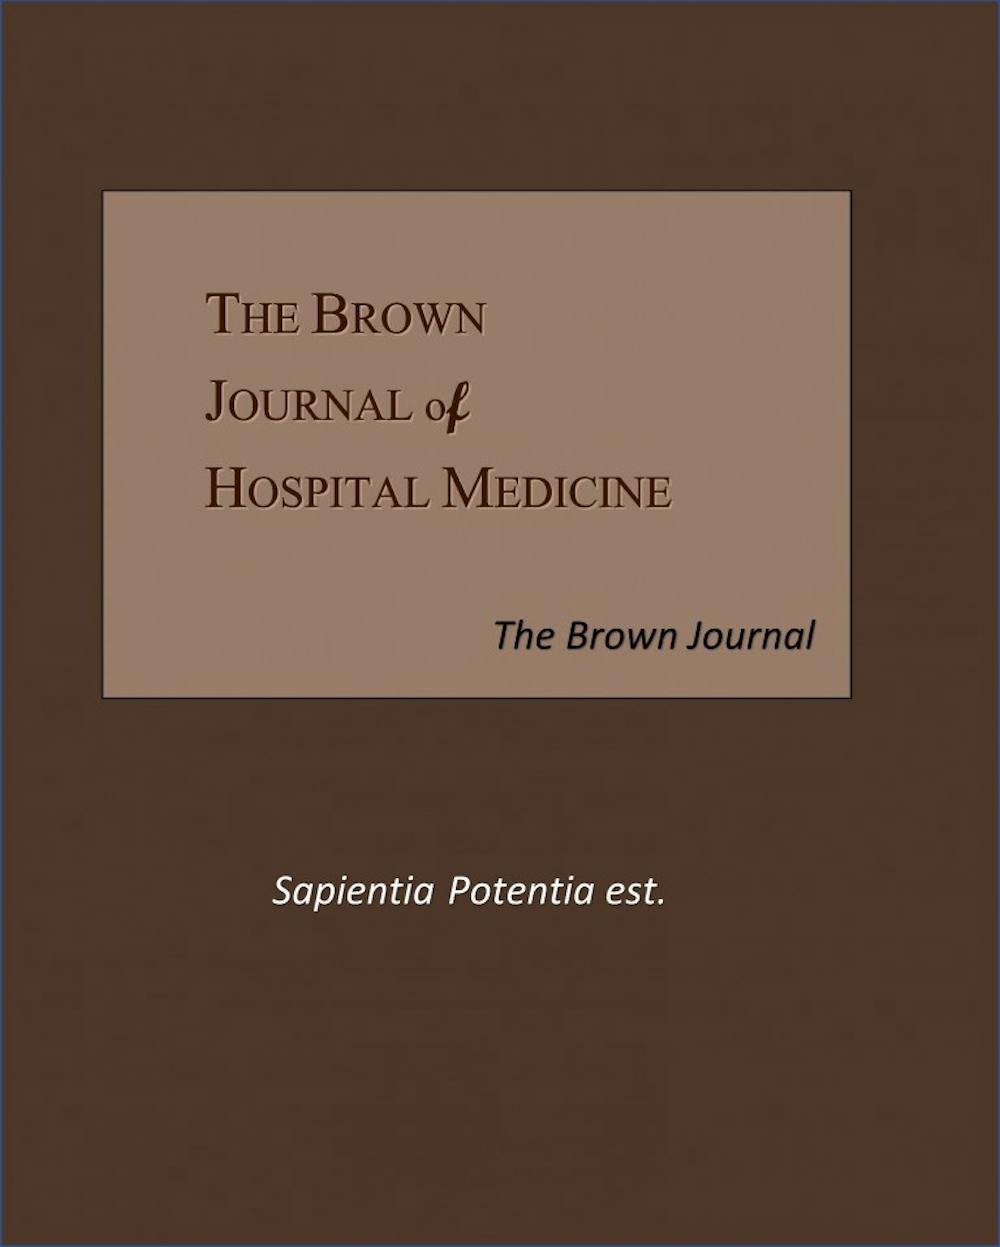 Brown Journal of Hospital Medicine hopes to promote scholarship within “inpatient and hospital medicine” at Brown, nationwide and internationally. 

Courtesy of Vijay Selvaraj